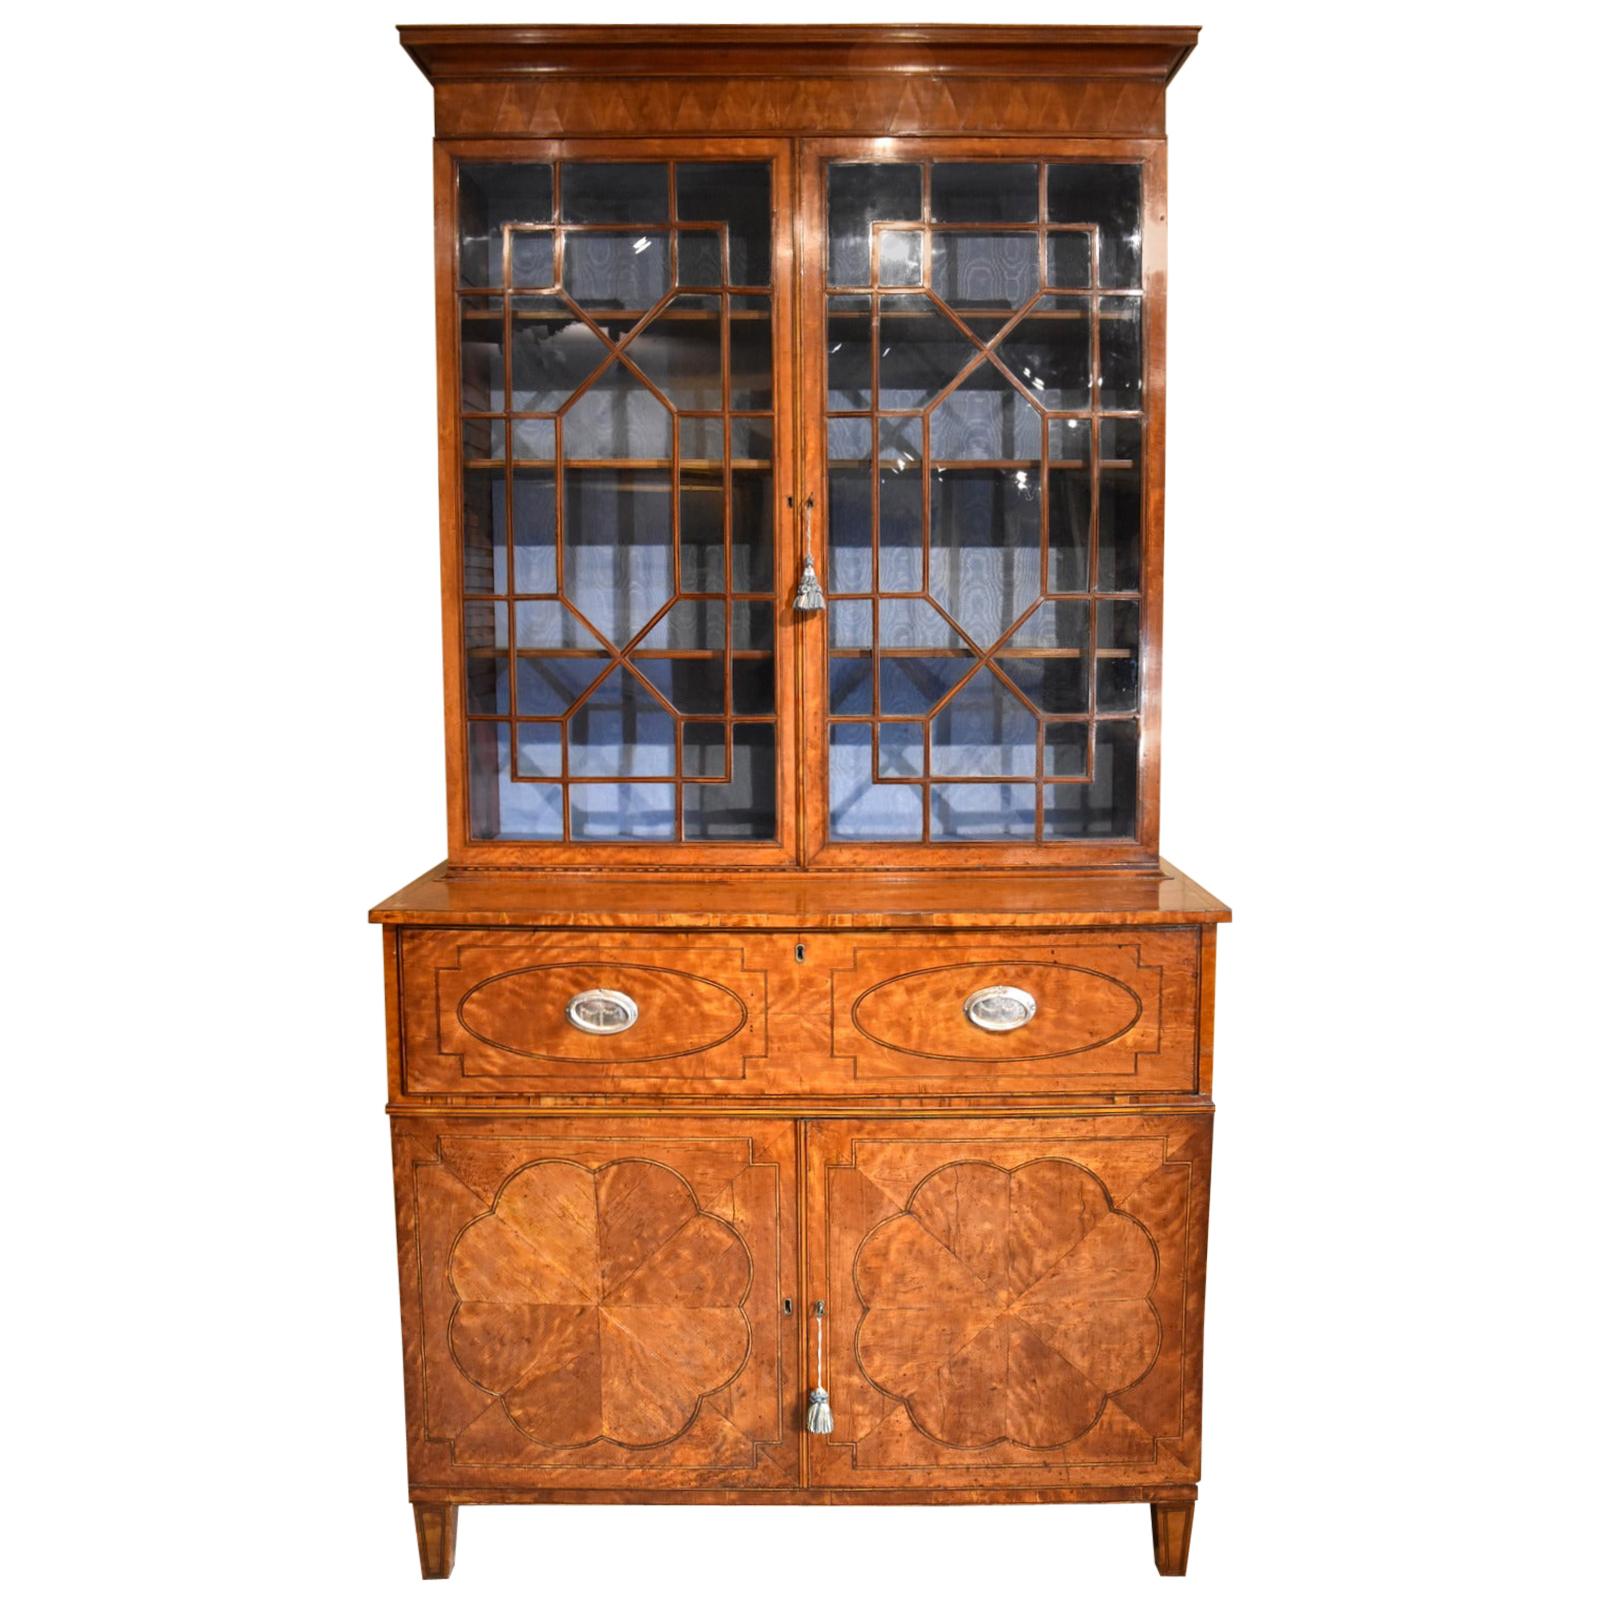 Stunning Late 18th Century Satinwood Secretaire Bookcase For Sale